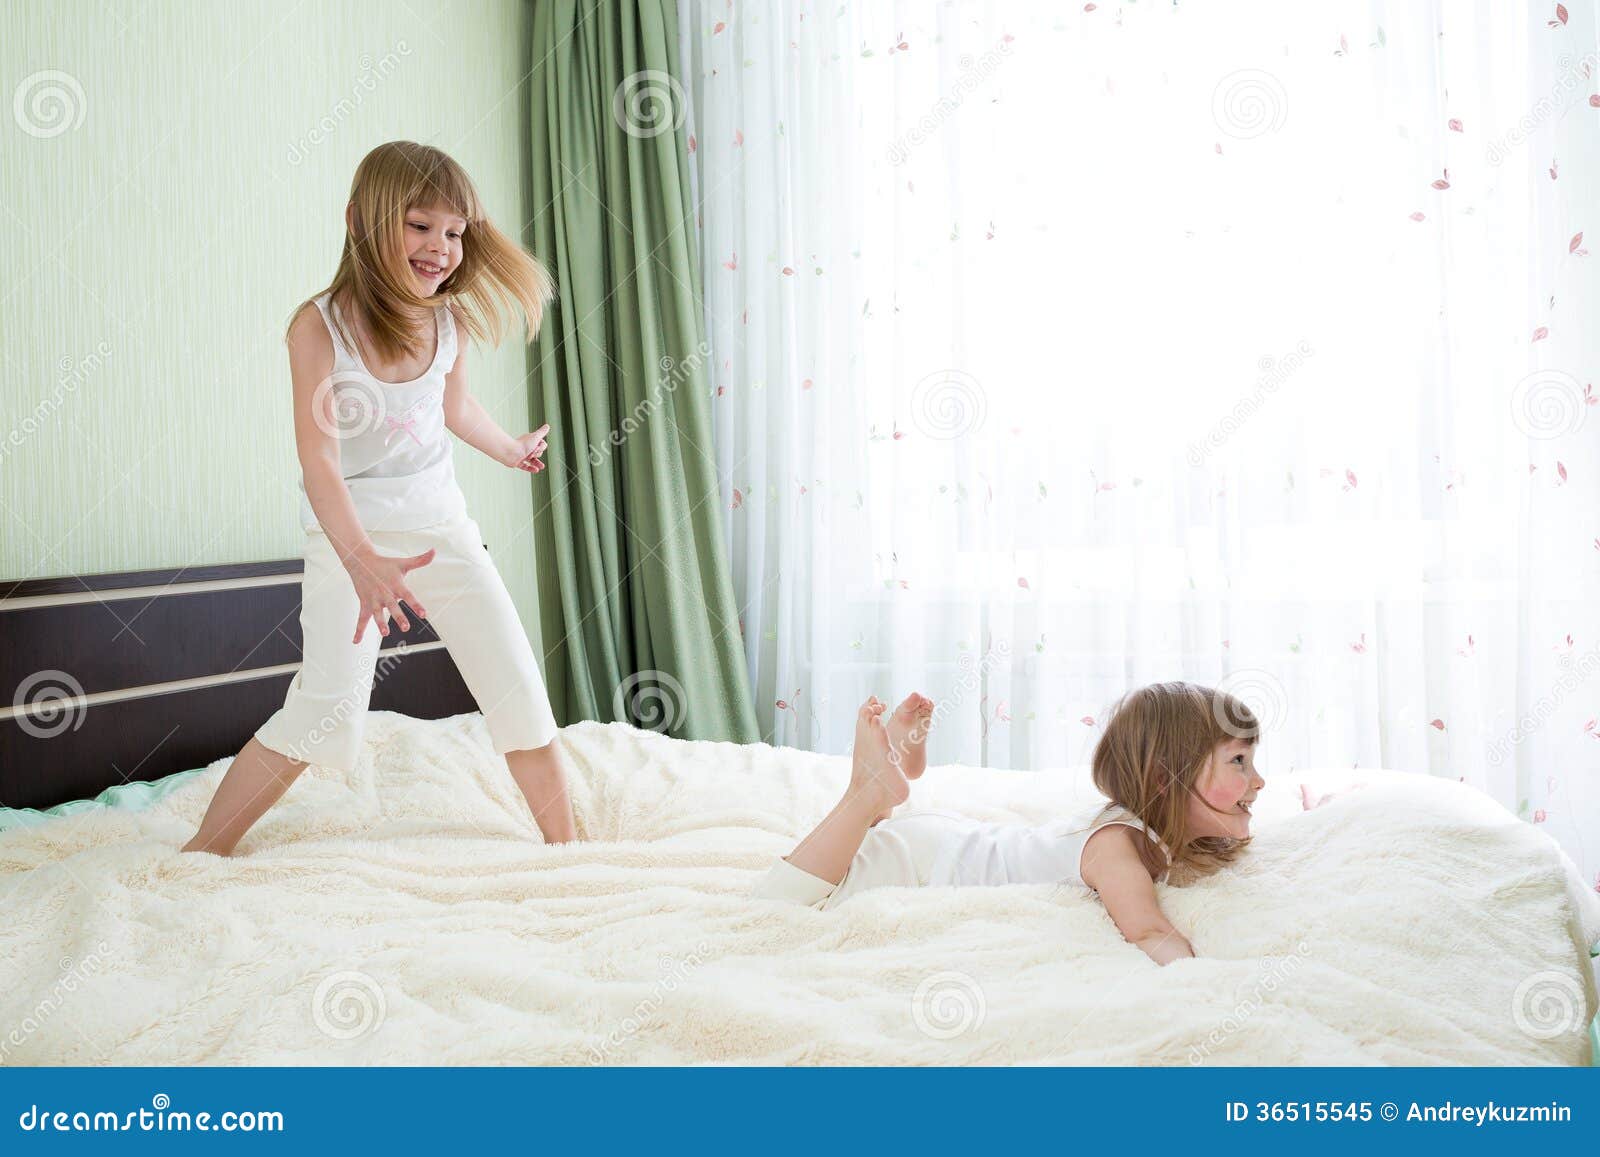 Two Sisters Playing On Bed Stock Image Image Of Playing 36515545